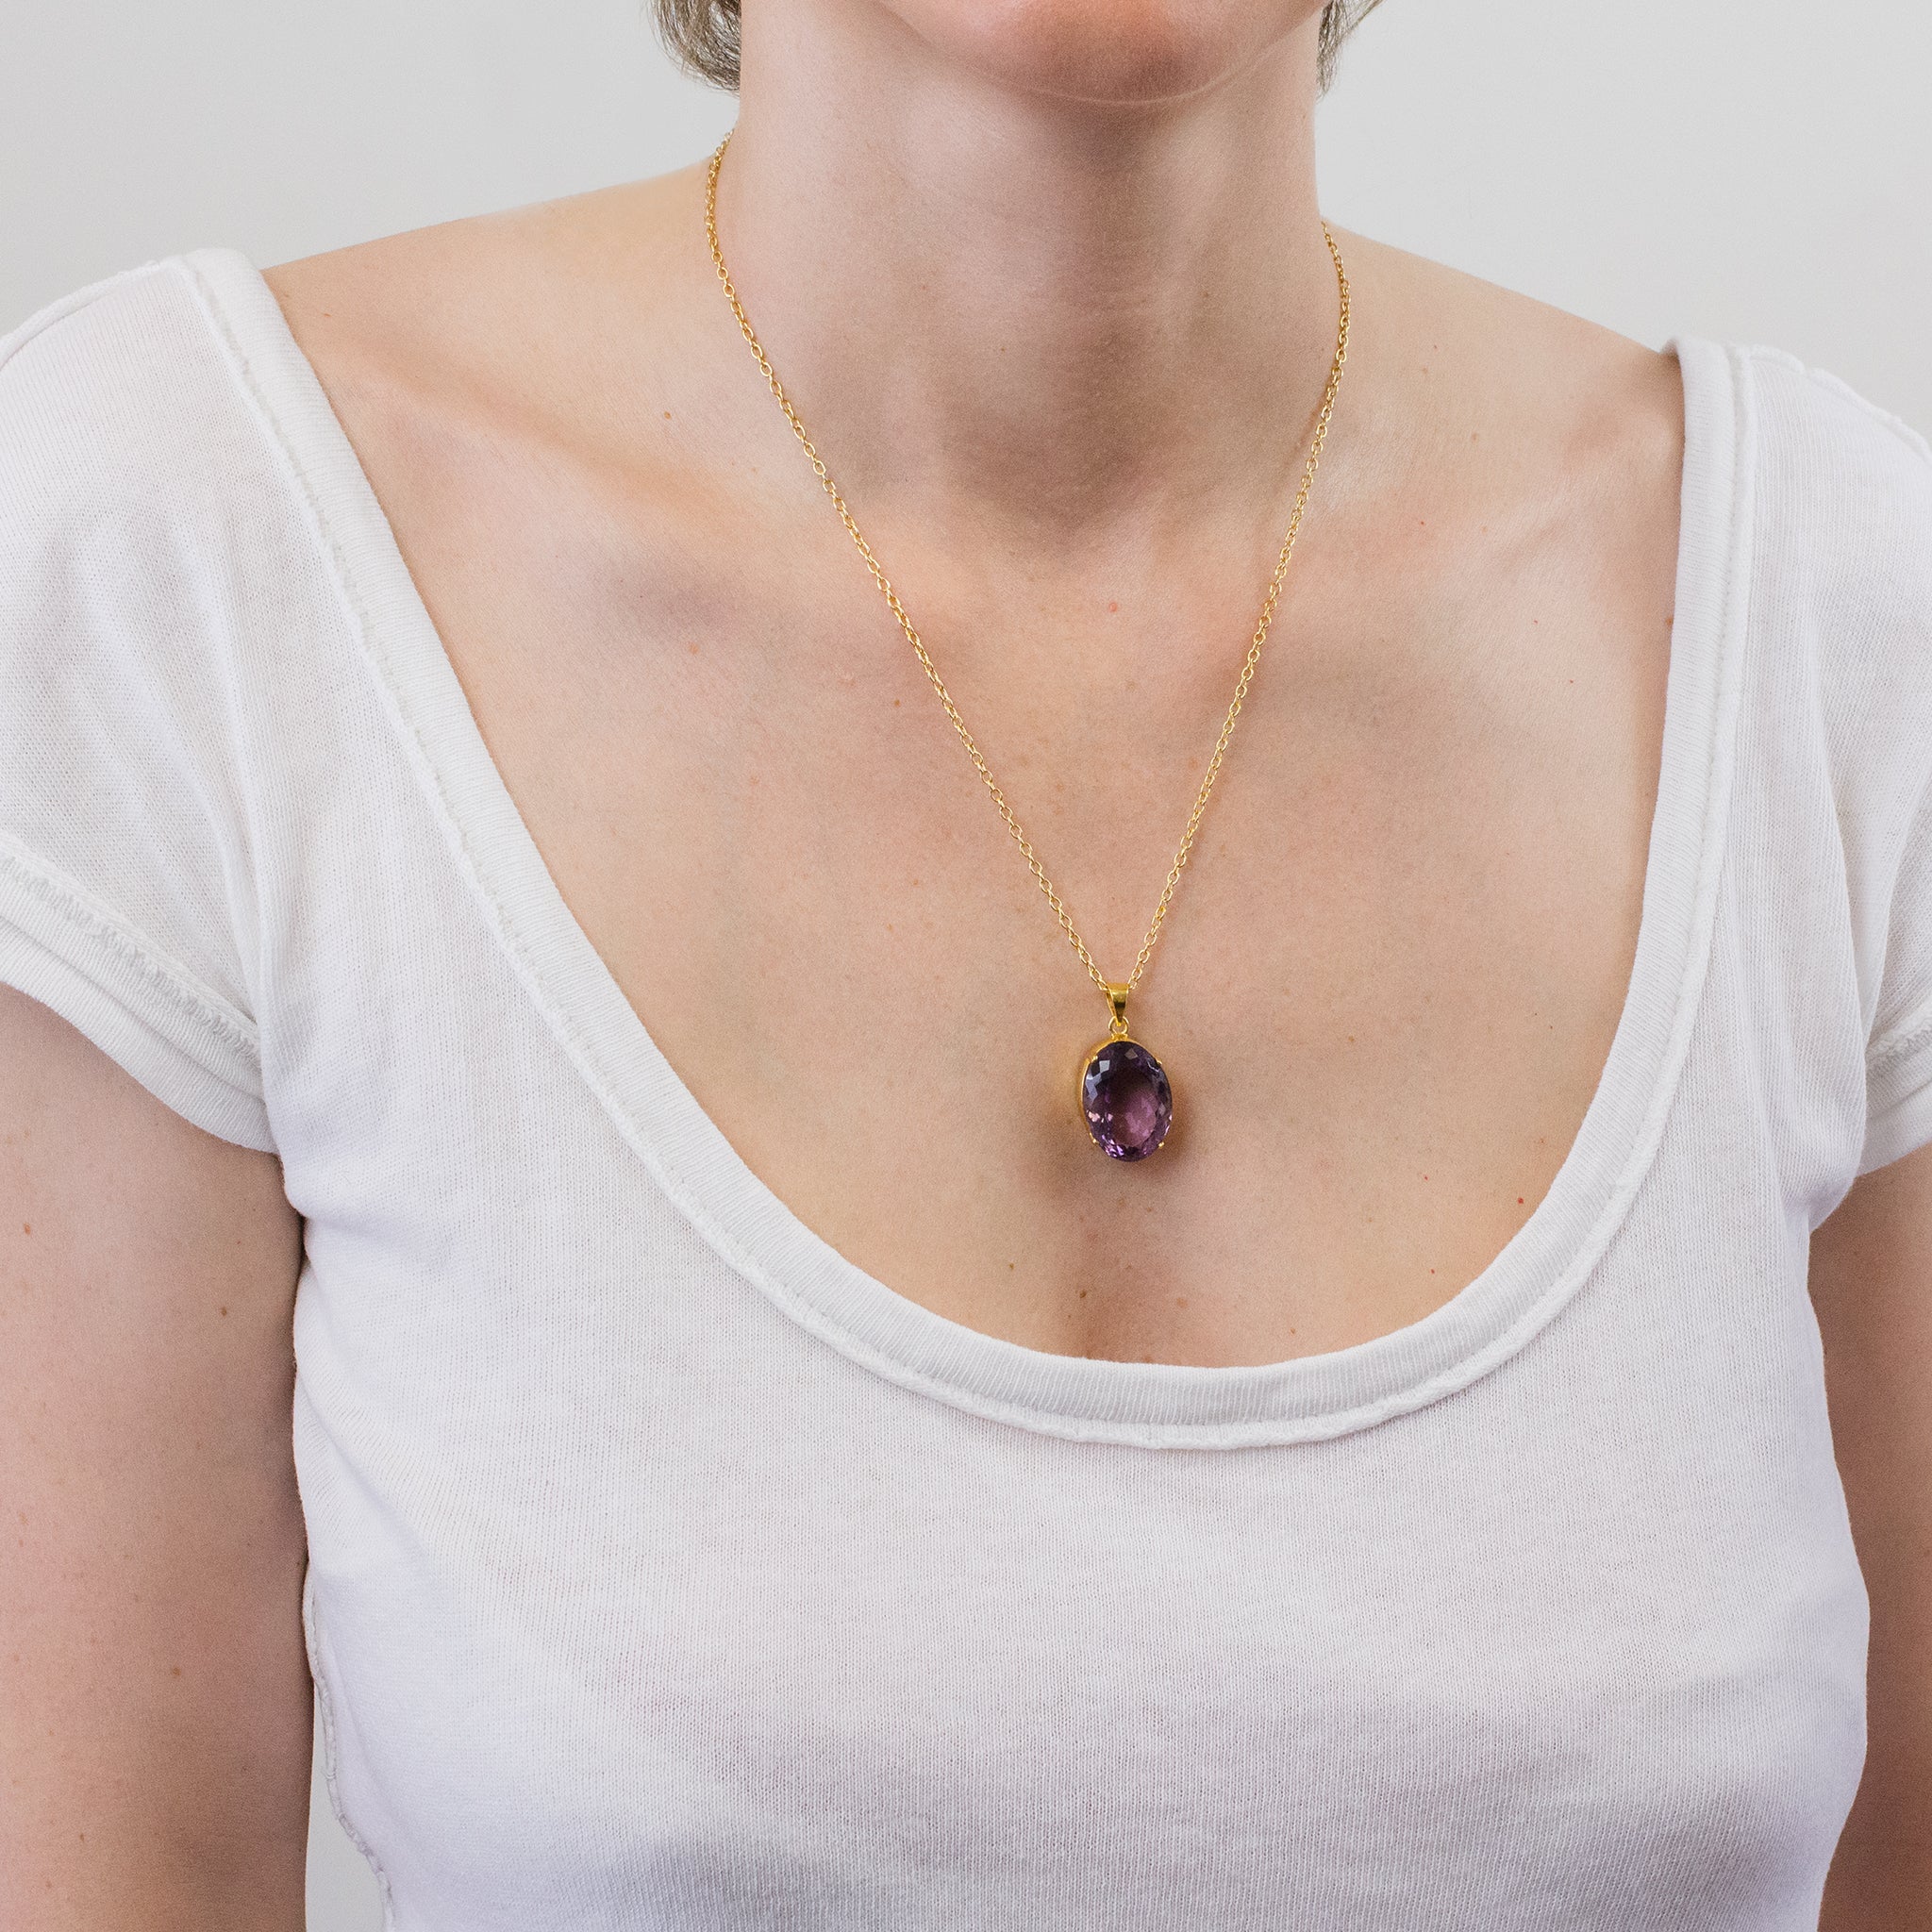 AMETHYST NECKLACE WITH YELLOW GOLD VERMEIL FINISH ON MODEL